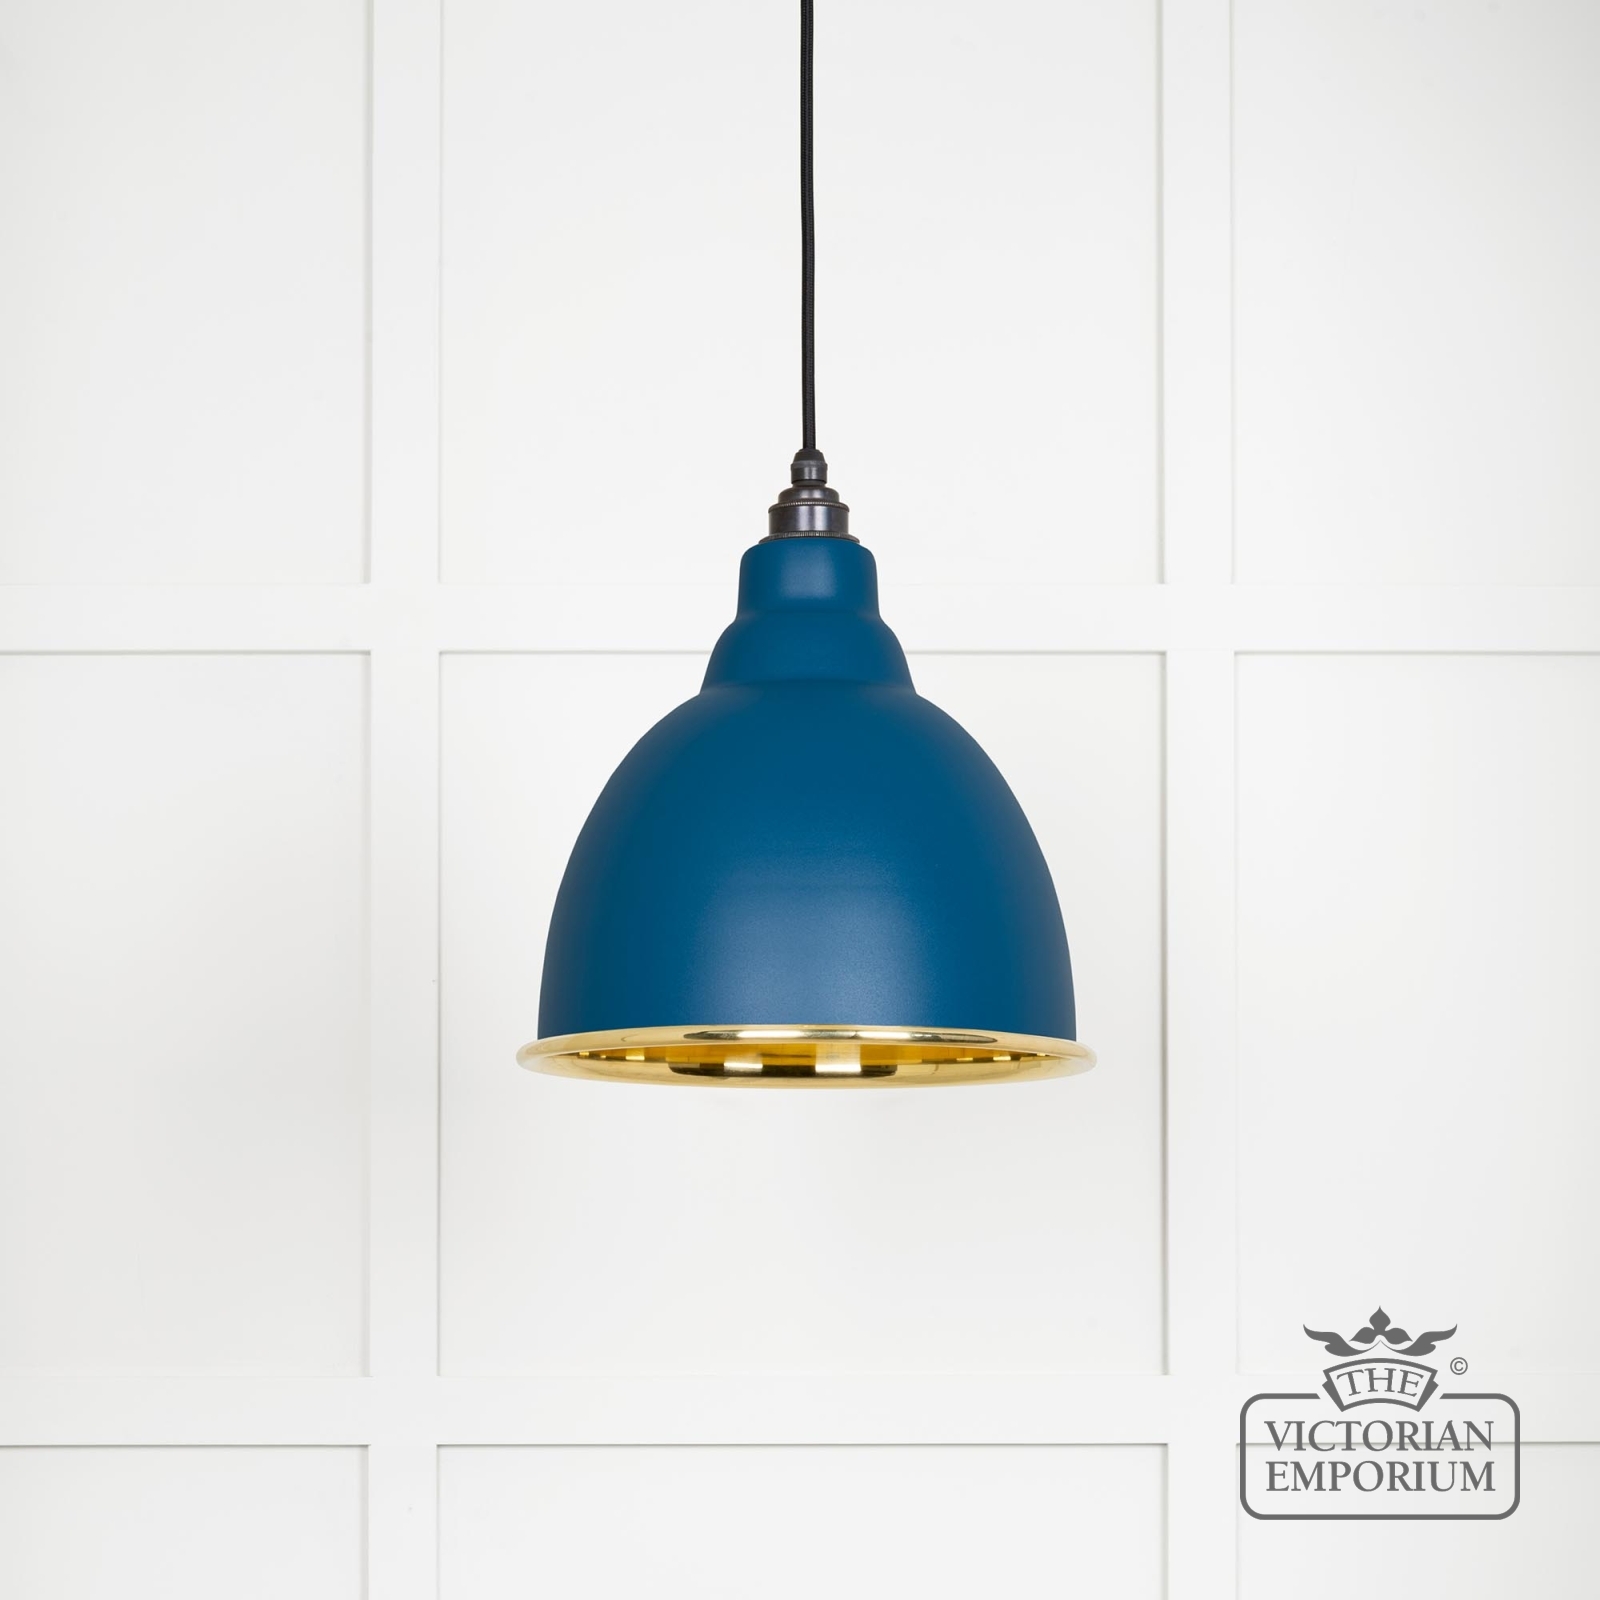 Brindle pendant light in Smooth brass and Upstream finish